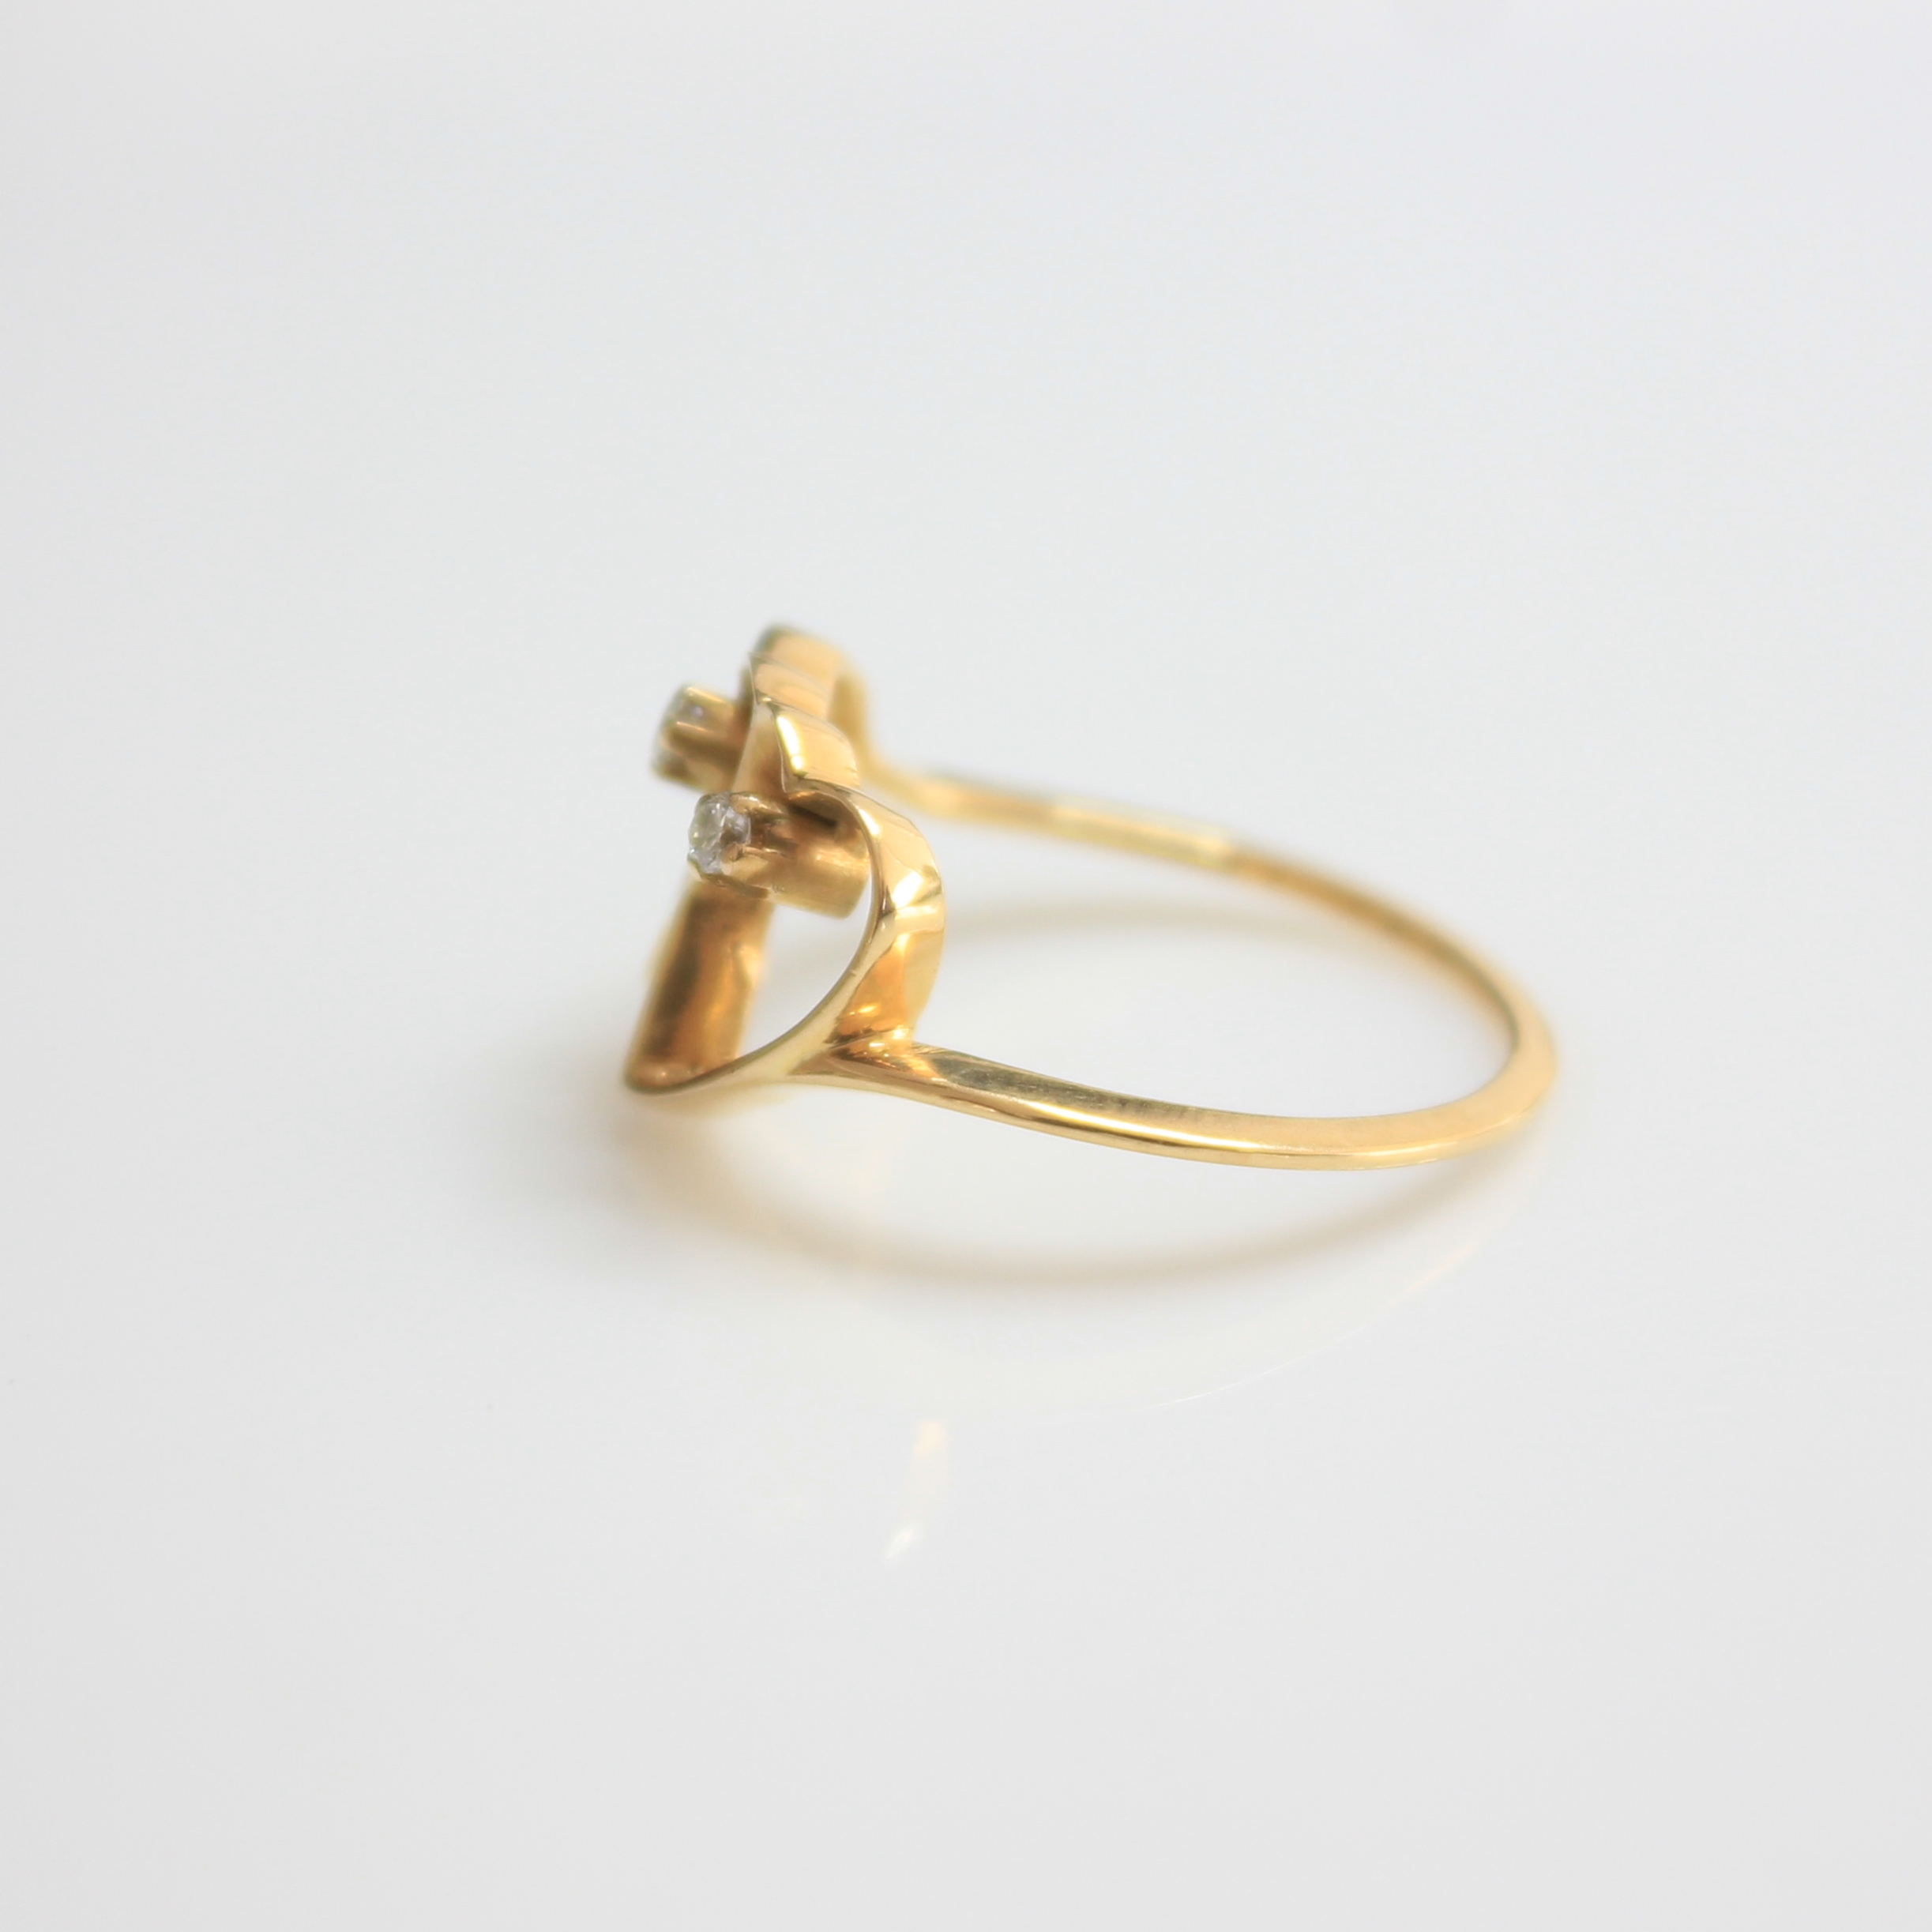 Best Gold Jewelry Gift | Best Aesthetic Yellow Gold Ring Jewelry Gift for  Women, Girls, Girlfriend,